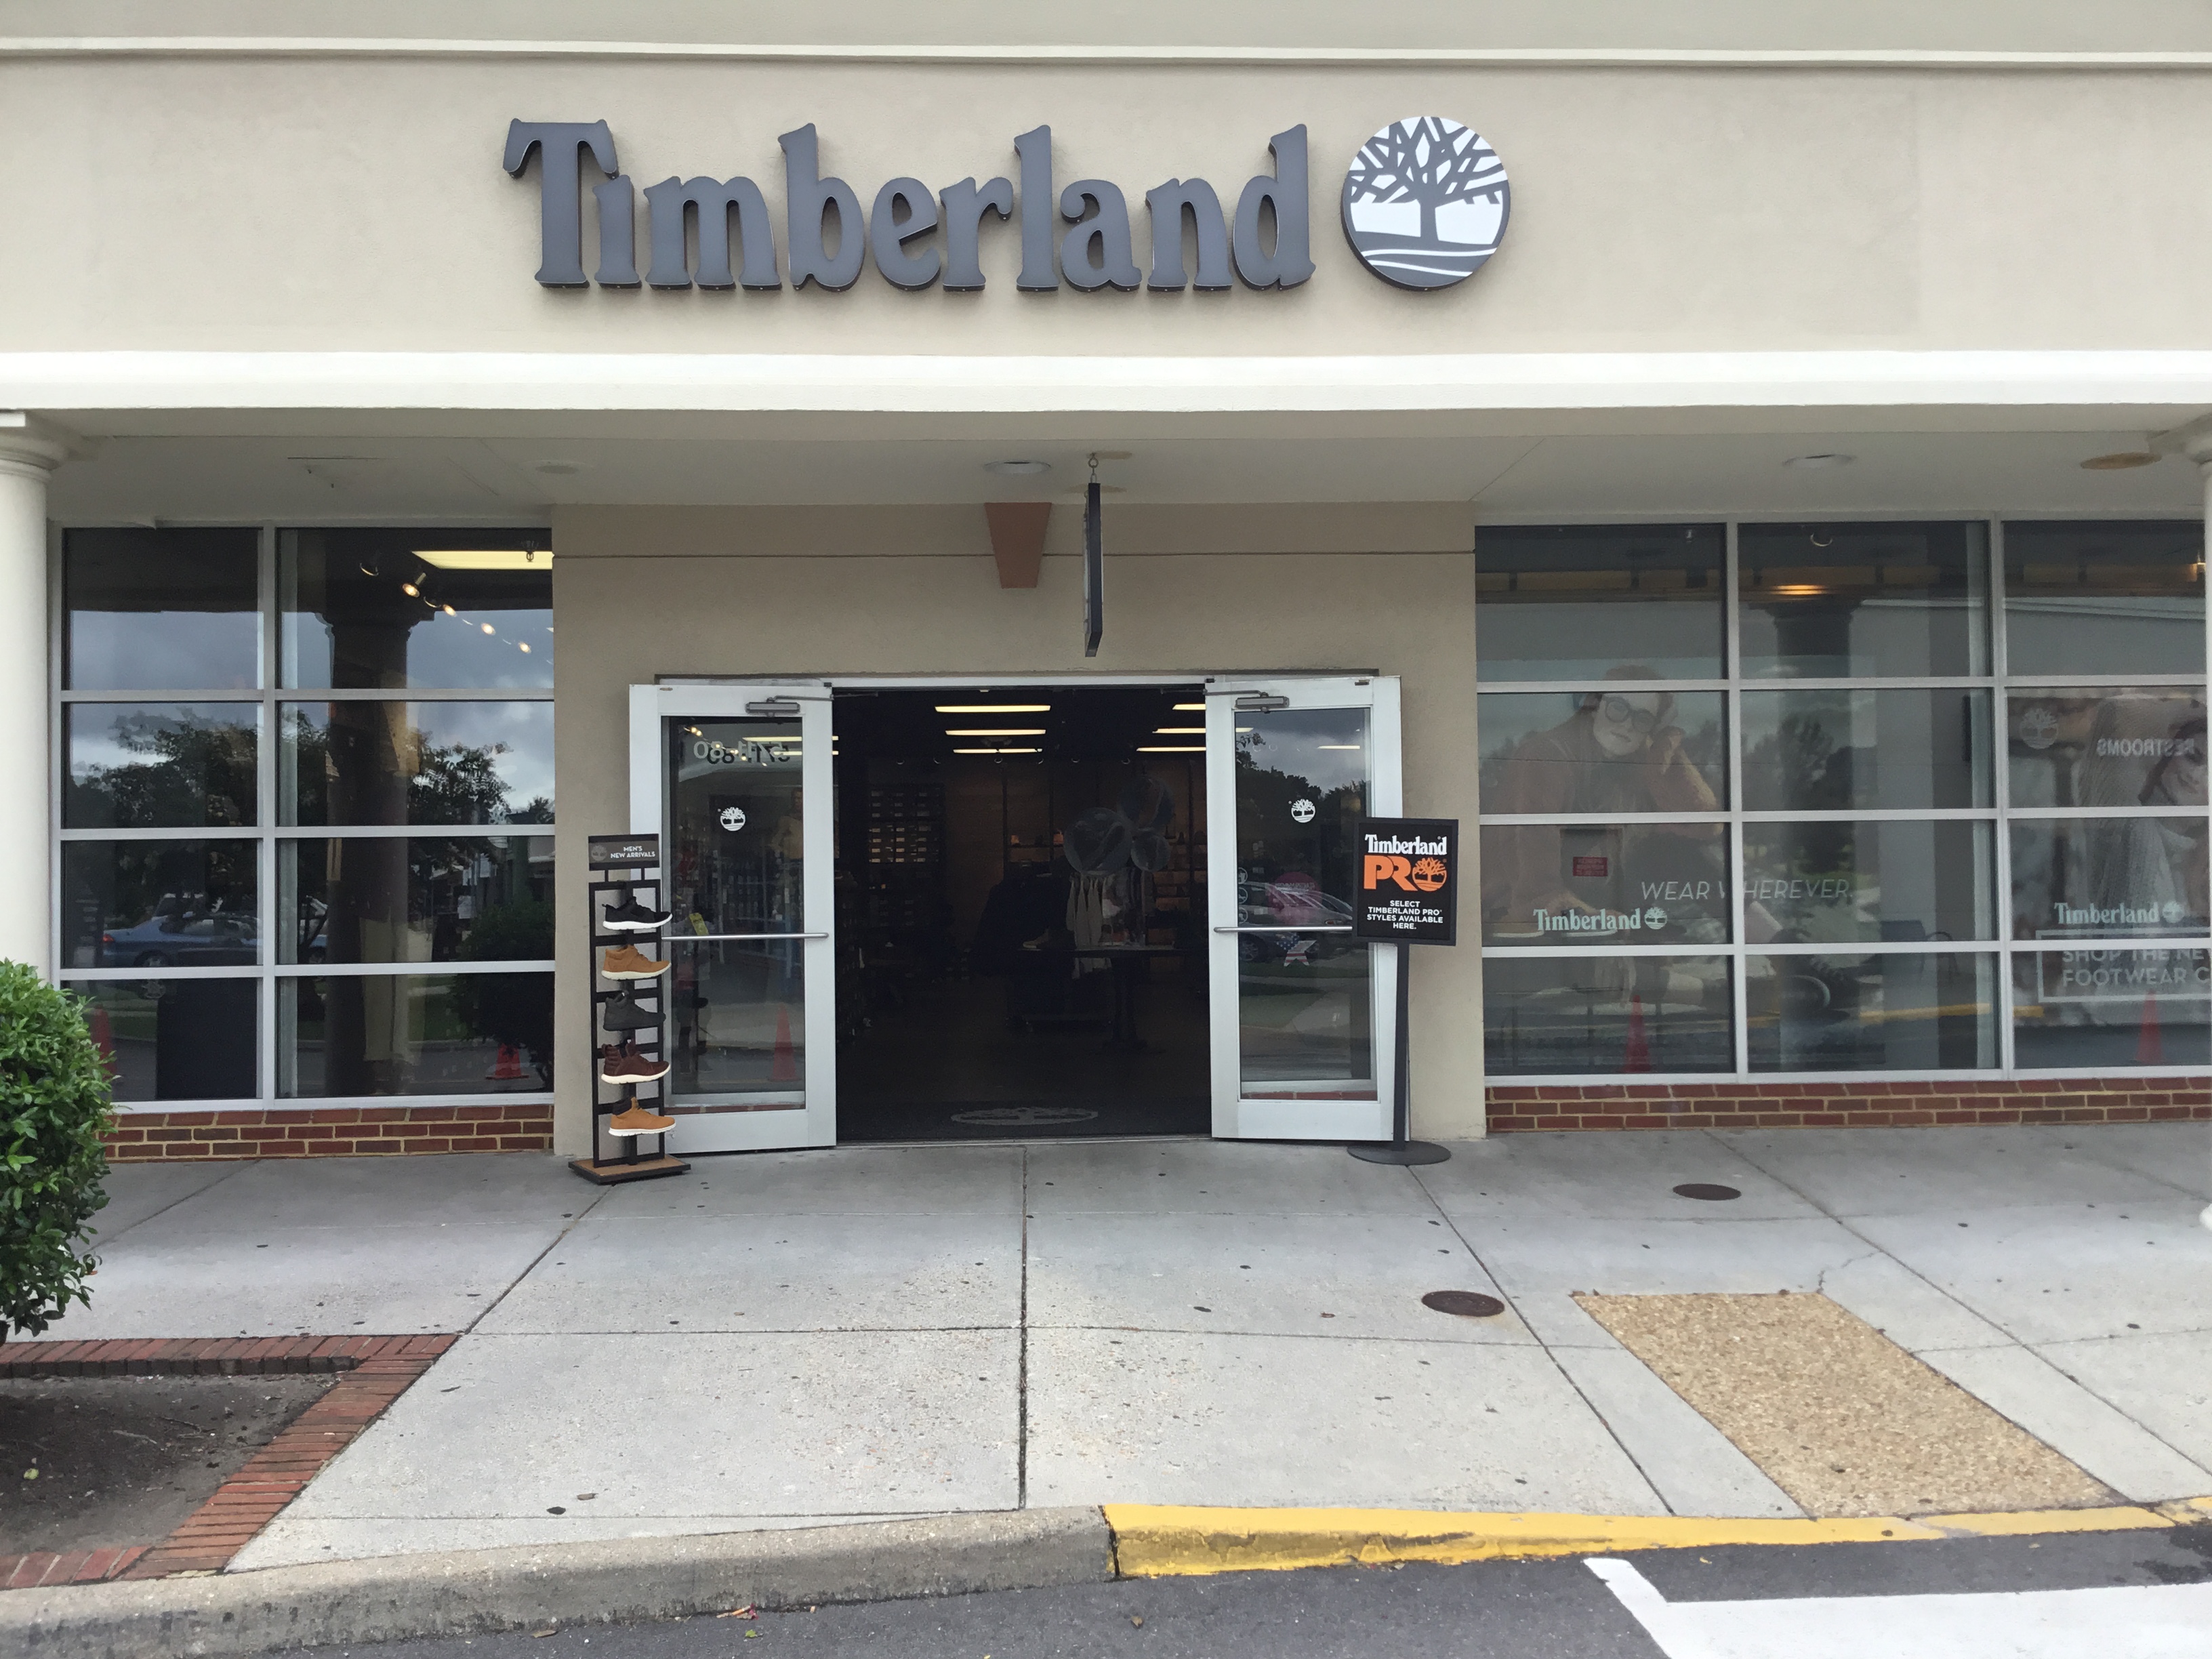 Timberland - Boots, Shoes, Clothing & Accessories in Williamsburg, VA